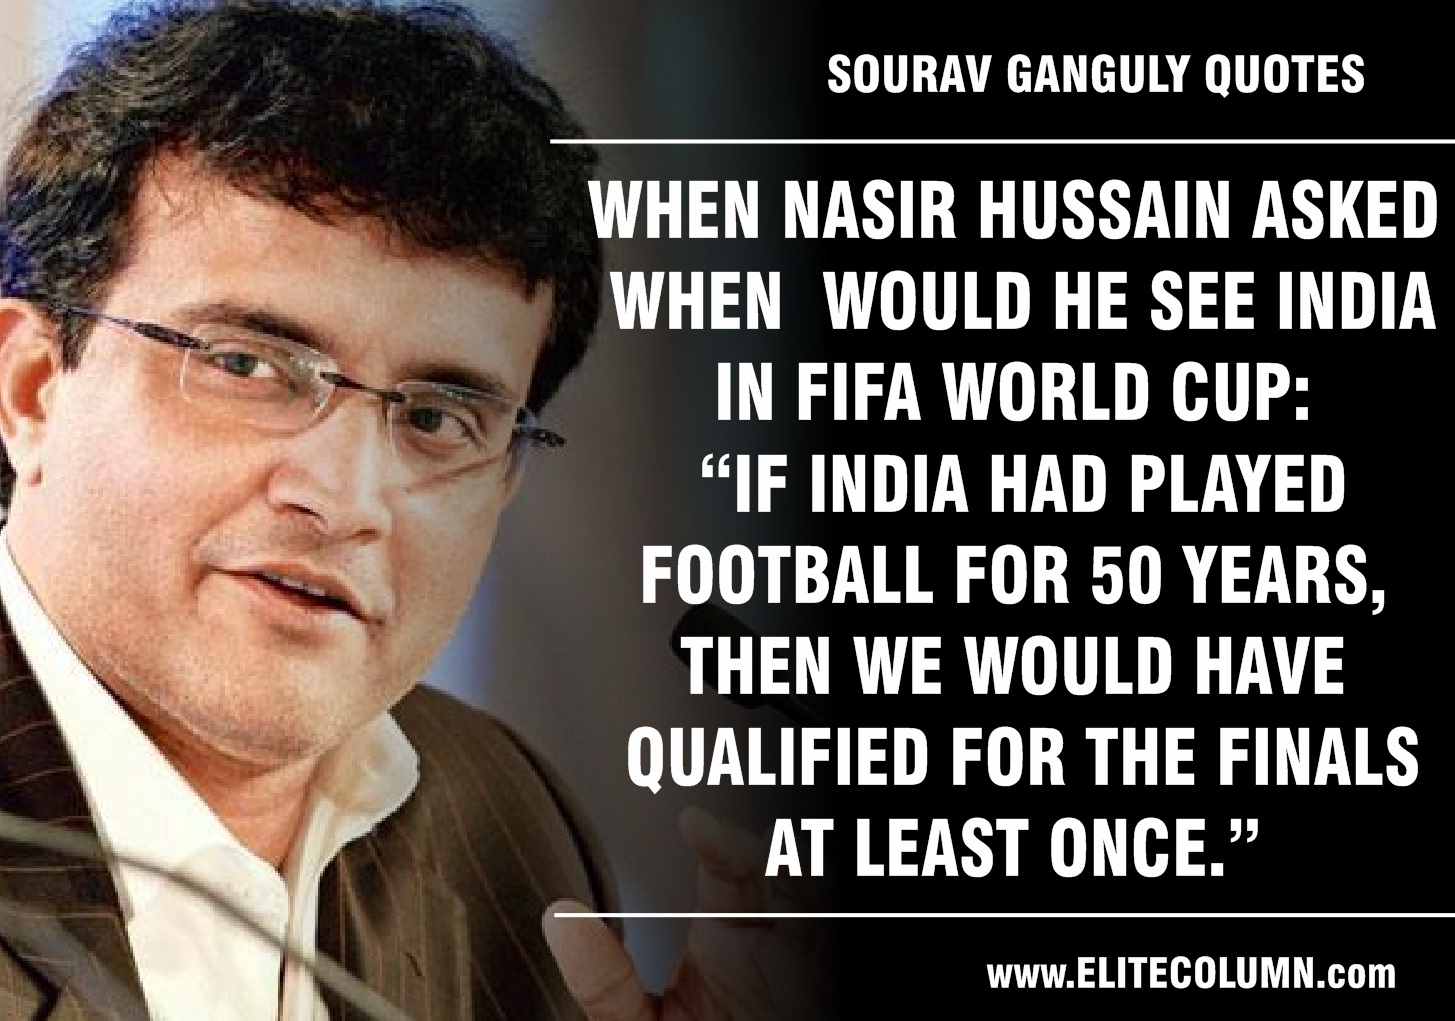 Sourav Ganguly Quotes (9)